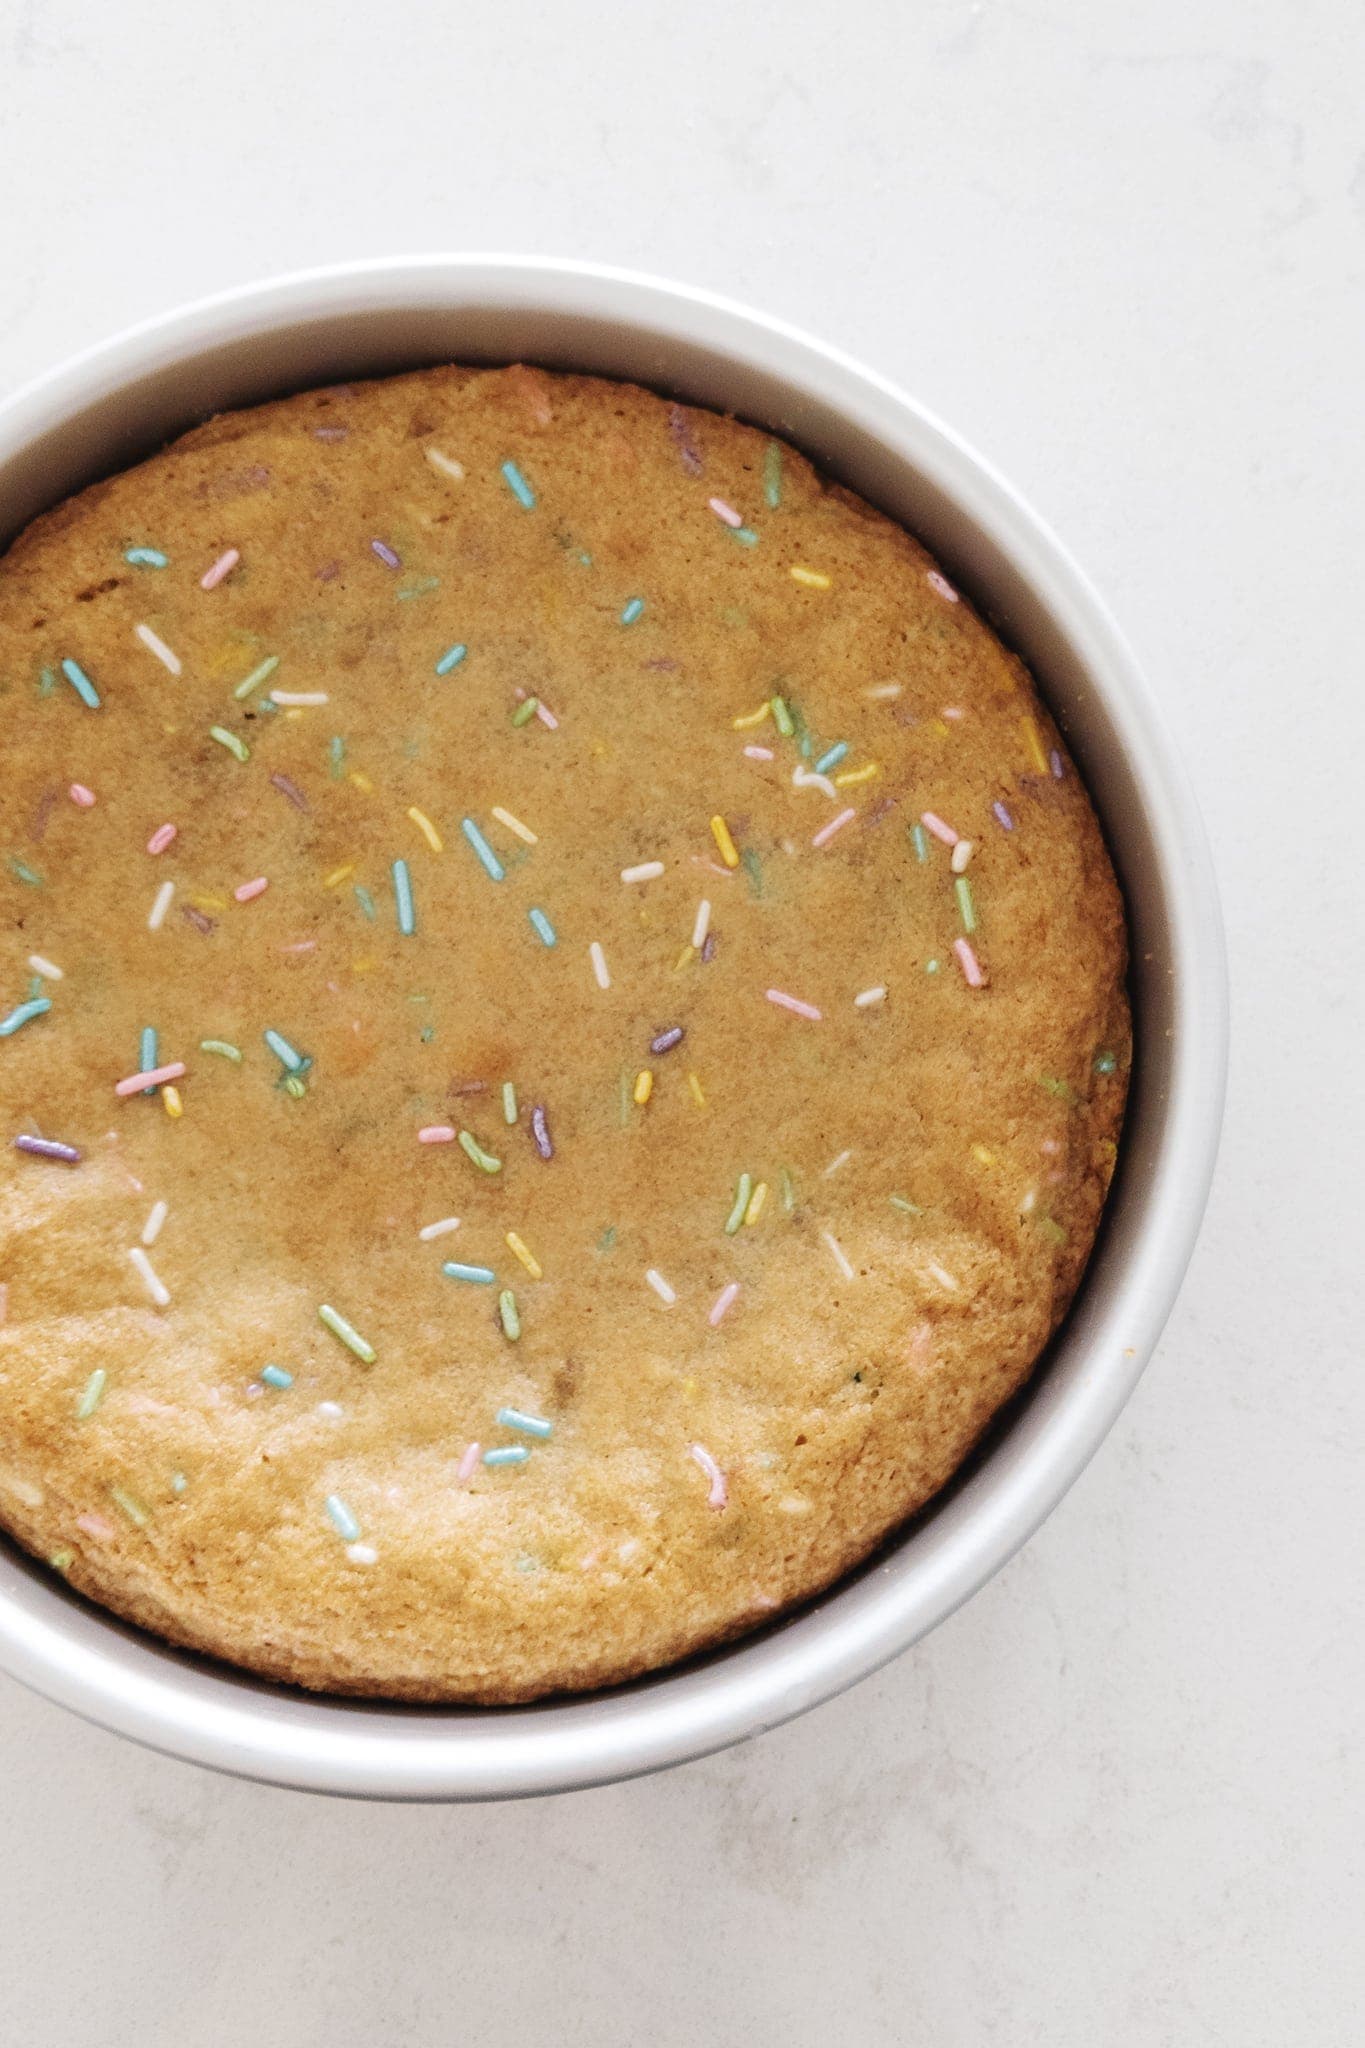 Baked cookie cake with sprinkles on top